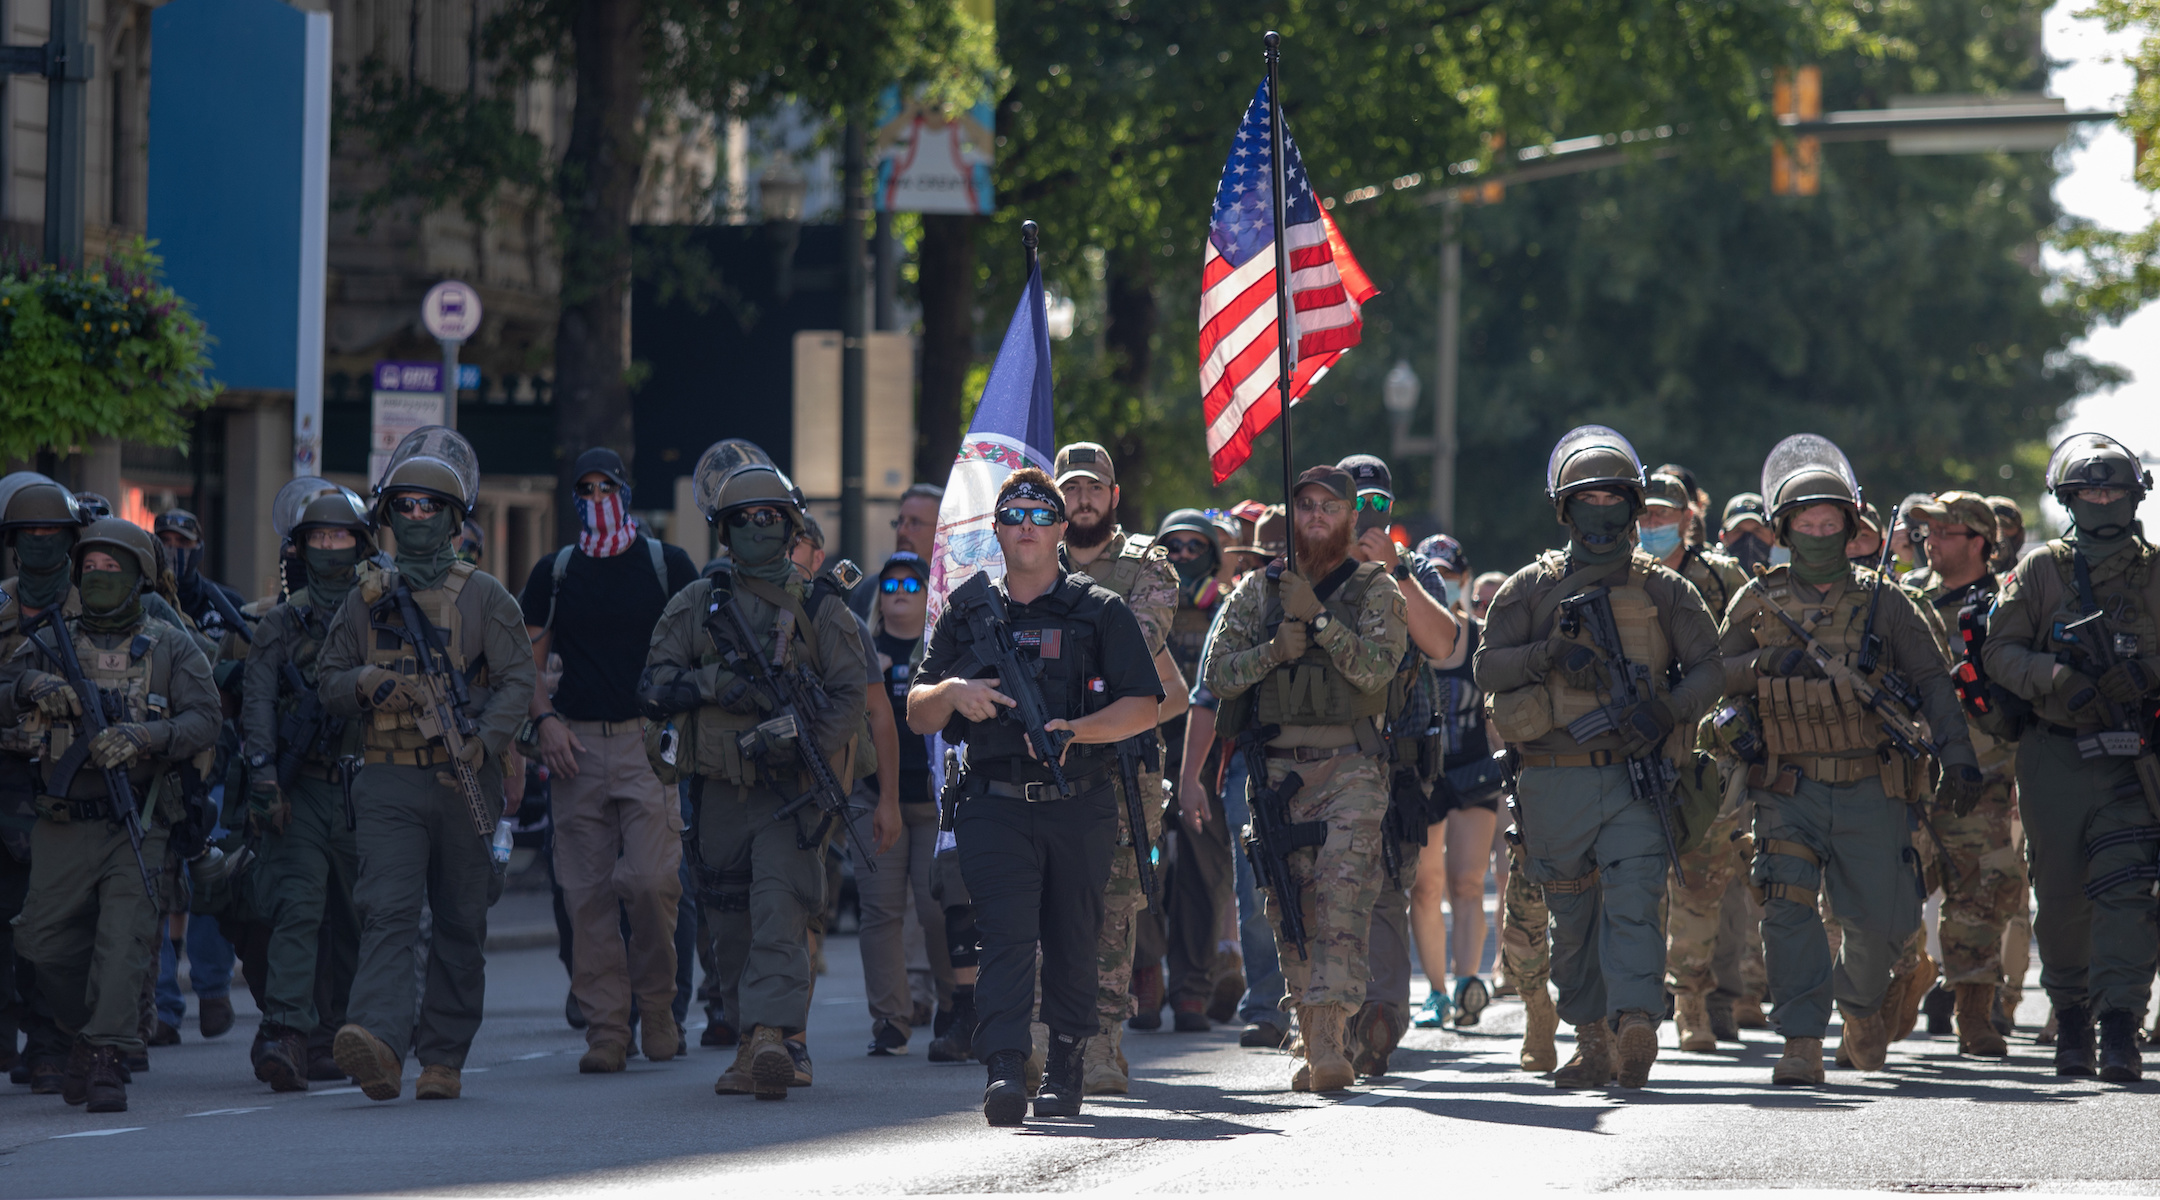 Armed gun rights protesters, led by a member of the far-right Boogaloo boys, march in Richmond, Virginia, Aug. 18, 2020. (Photo/JTA-Chad Martin/LightRocket via Getty Images)